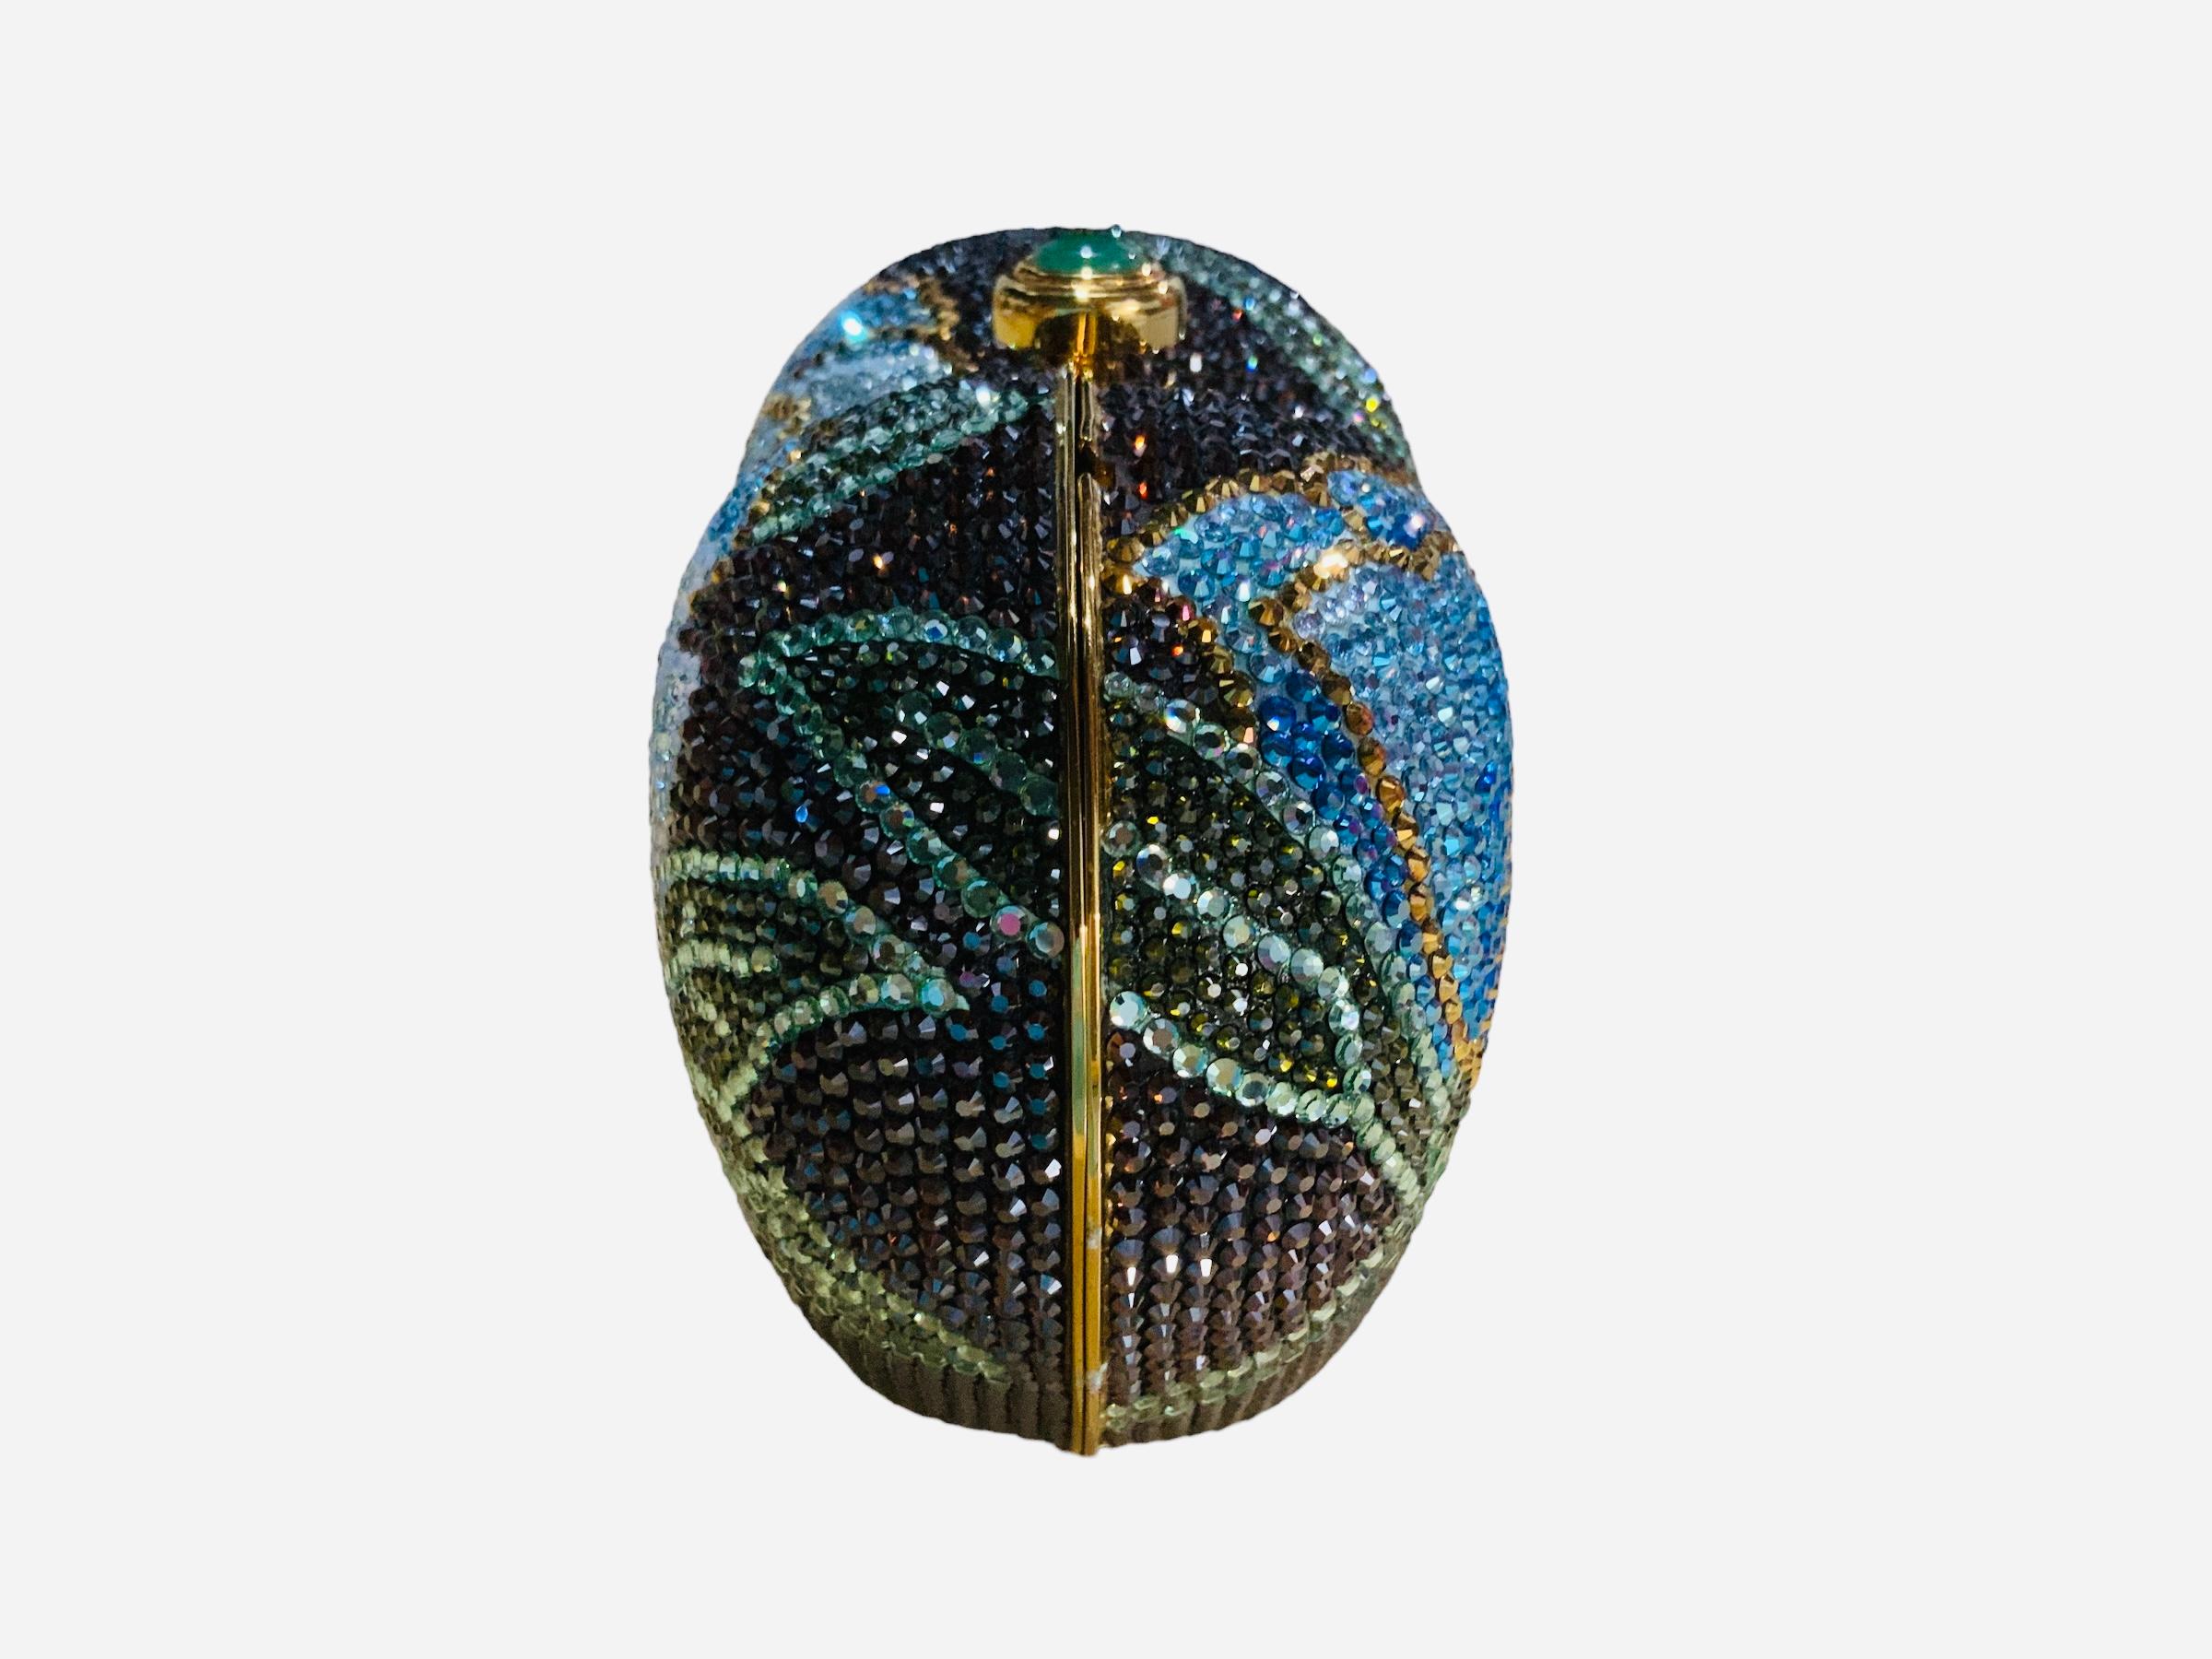 This is a Judith Leiber Swarovski crystals minaudiere / clutch. It depicts a gold tone metal heart shaped minaudiere adorned with a large peony flower with green leaves in the front and a semi close one in the back. Long branches of green leaves